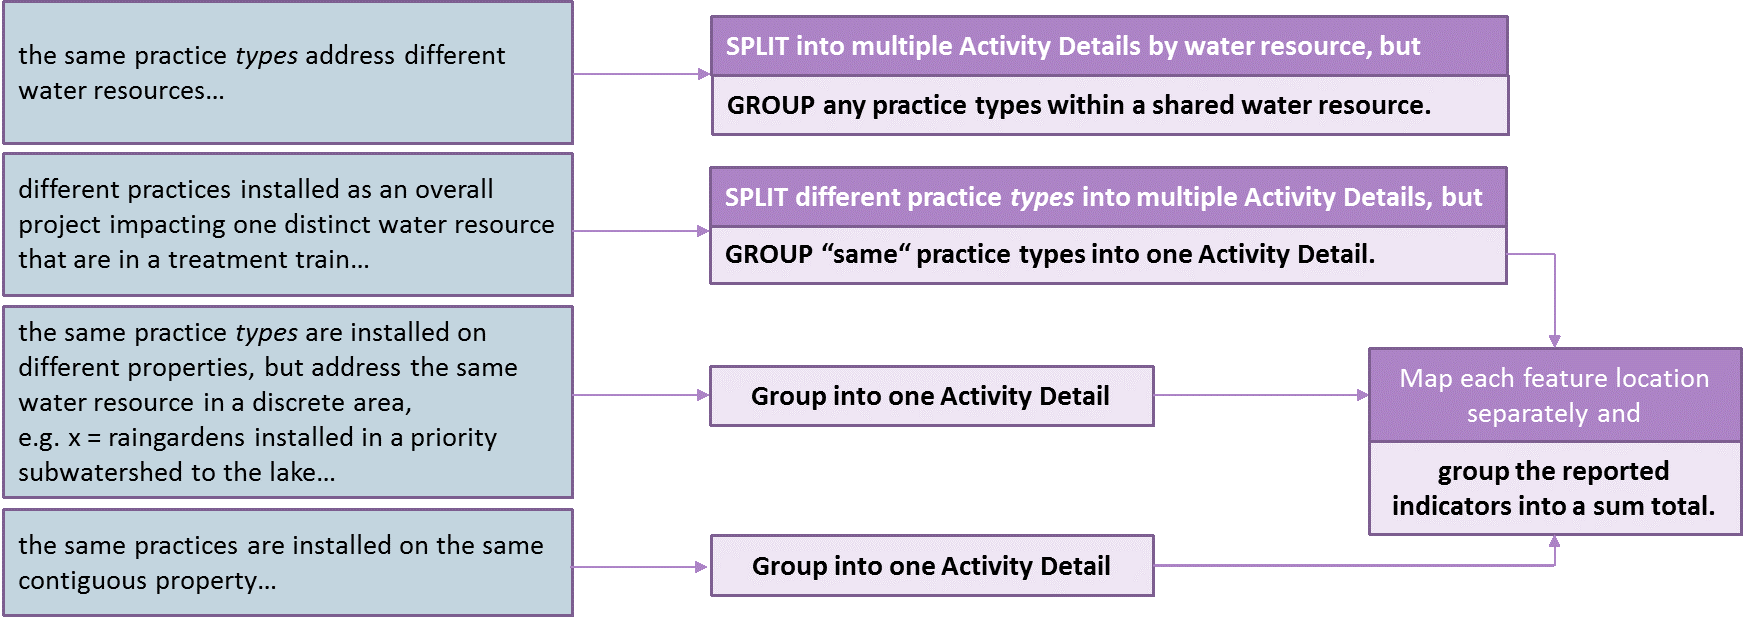 Decision tree for splitting or grouping at Activity Detail level